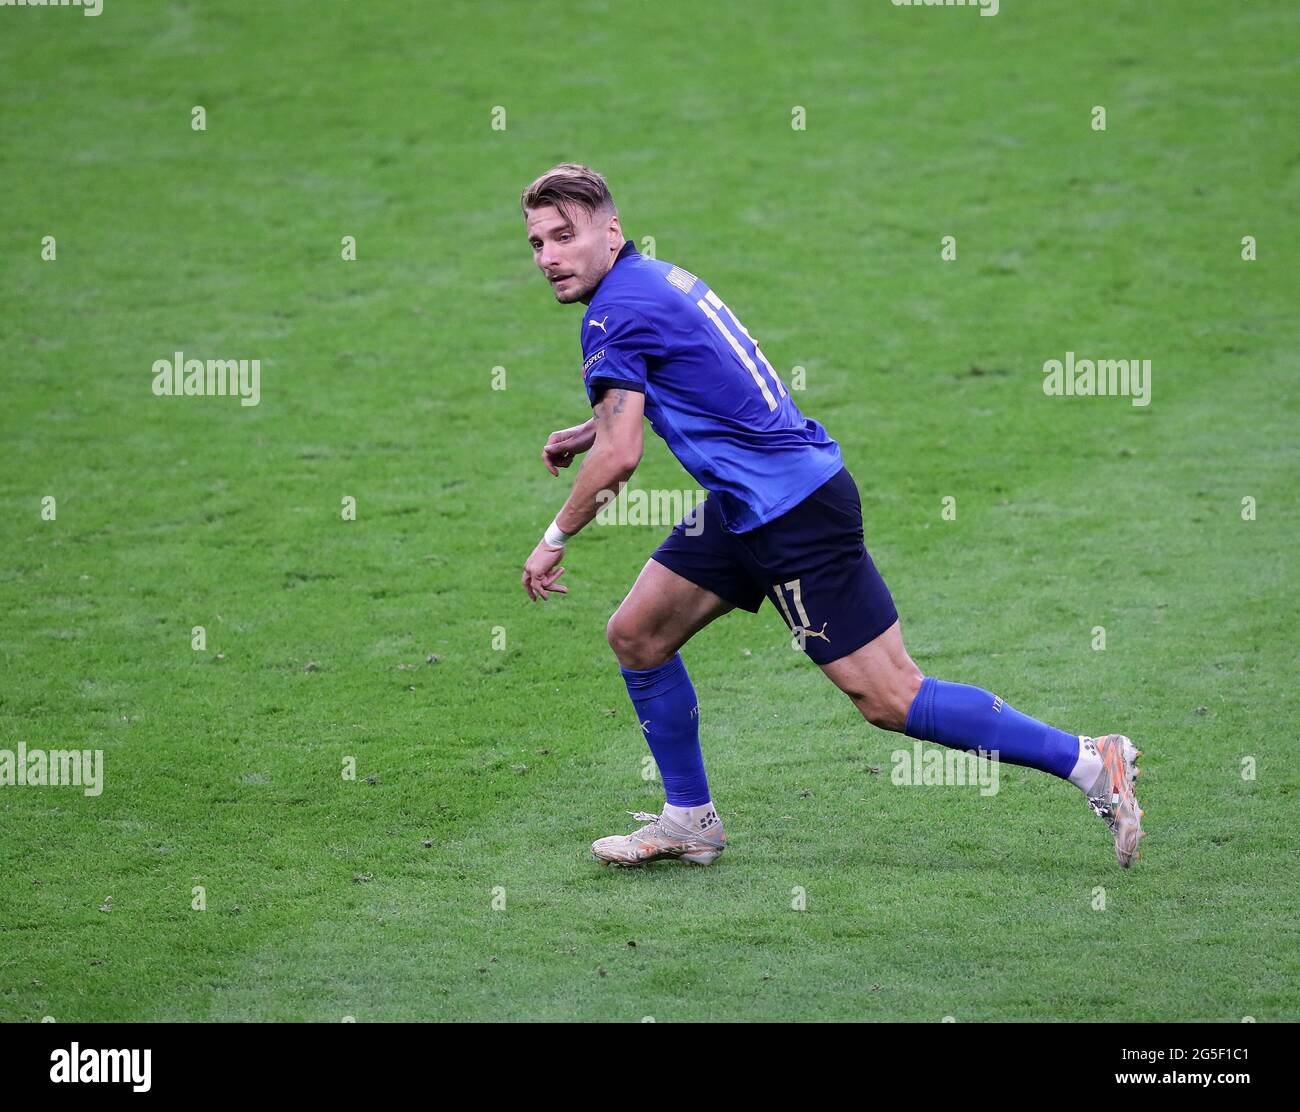 London, England, 26th June 2021. Ciro Immobile of Italy during the UEFA European Championships match at Wembley Stadium, London. Picture credit should read: David Klein / Sportimage Stock Photo